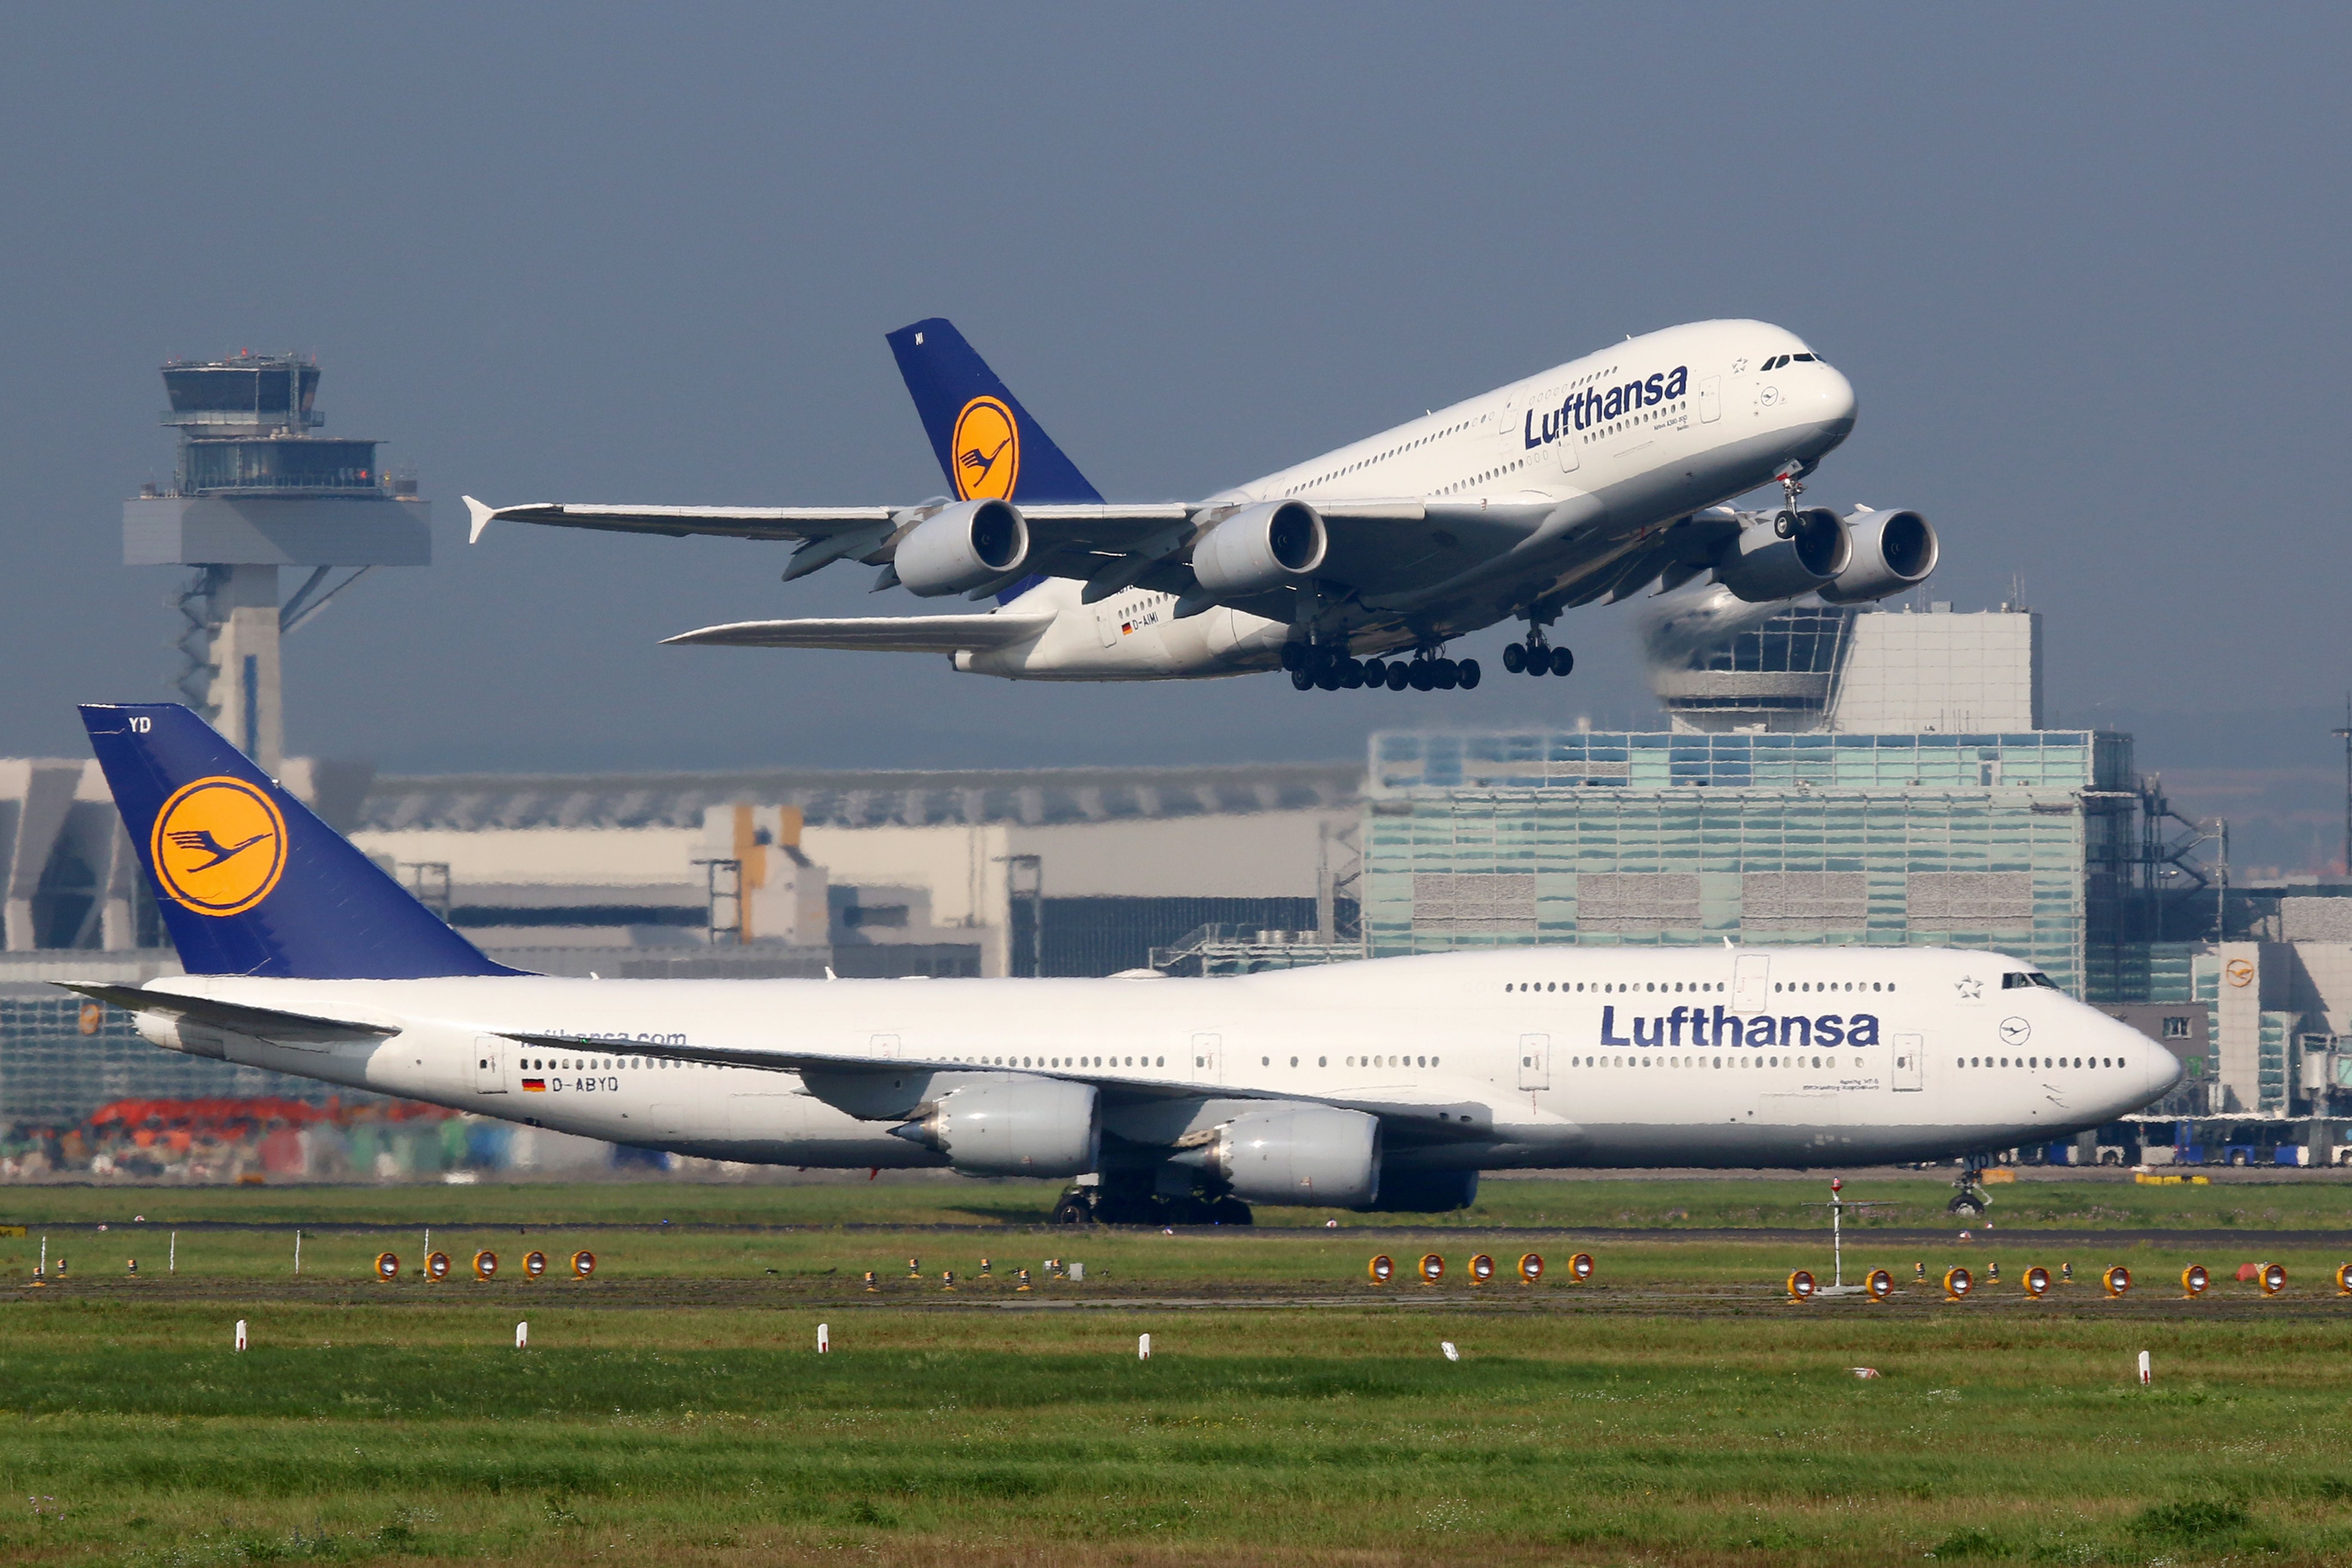 A Lufthansa Airbus A380 taking off while a Lufthansa Boeing 747 sits on a taxiway.